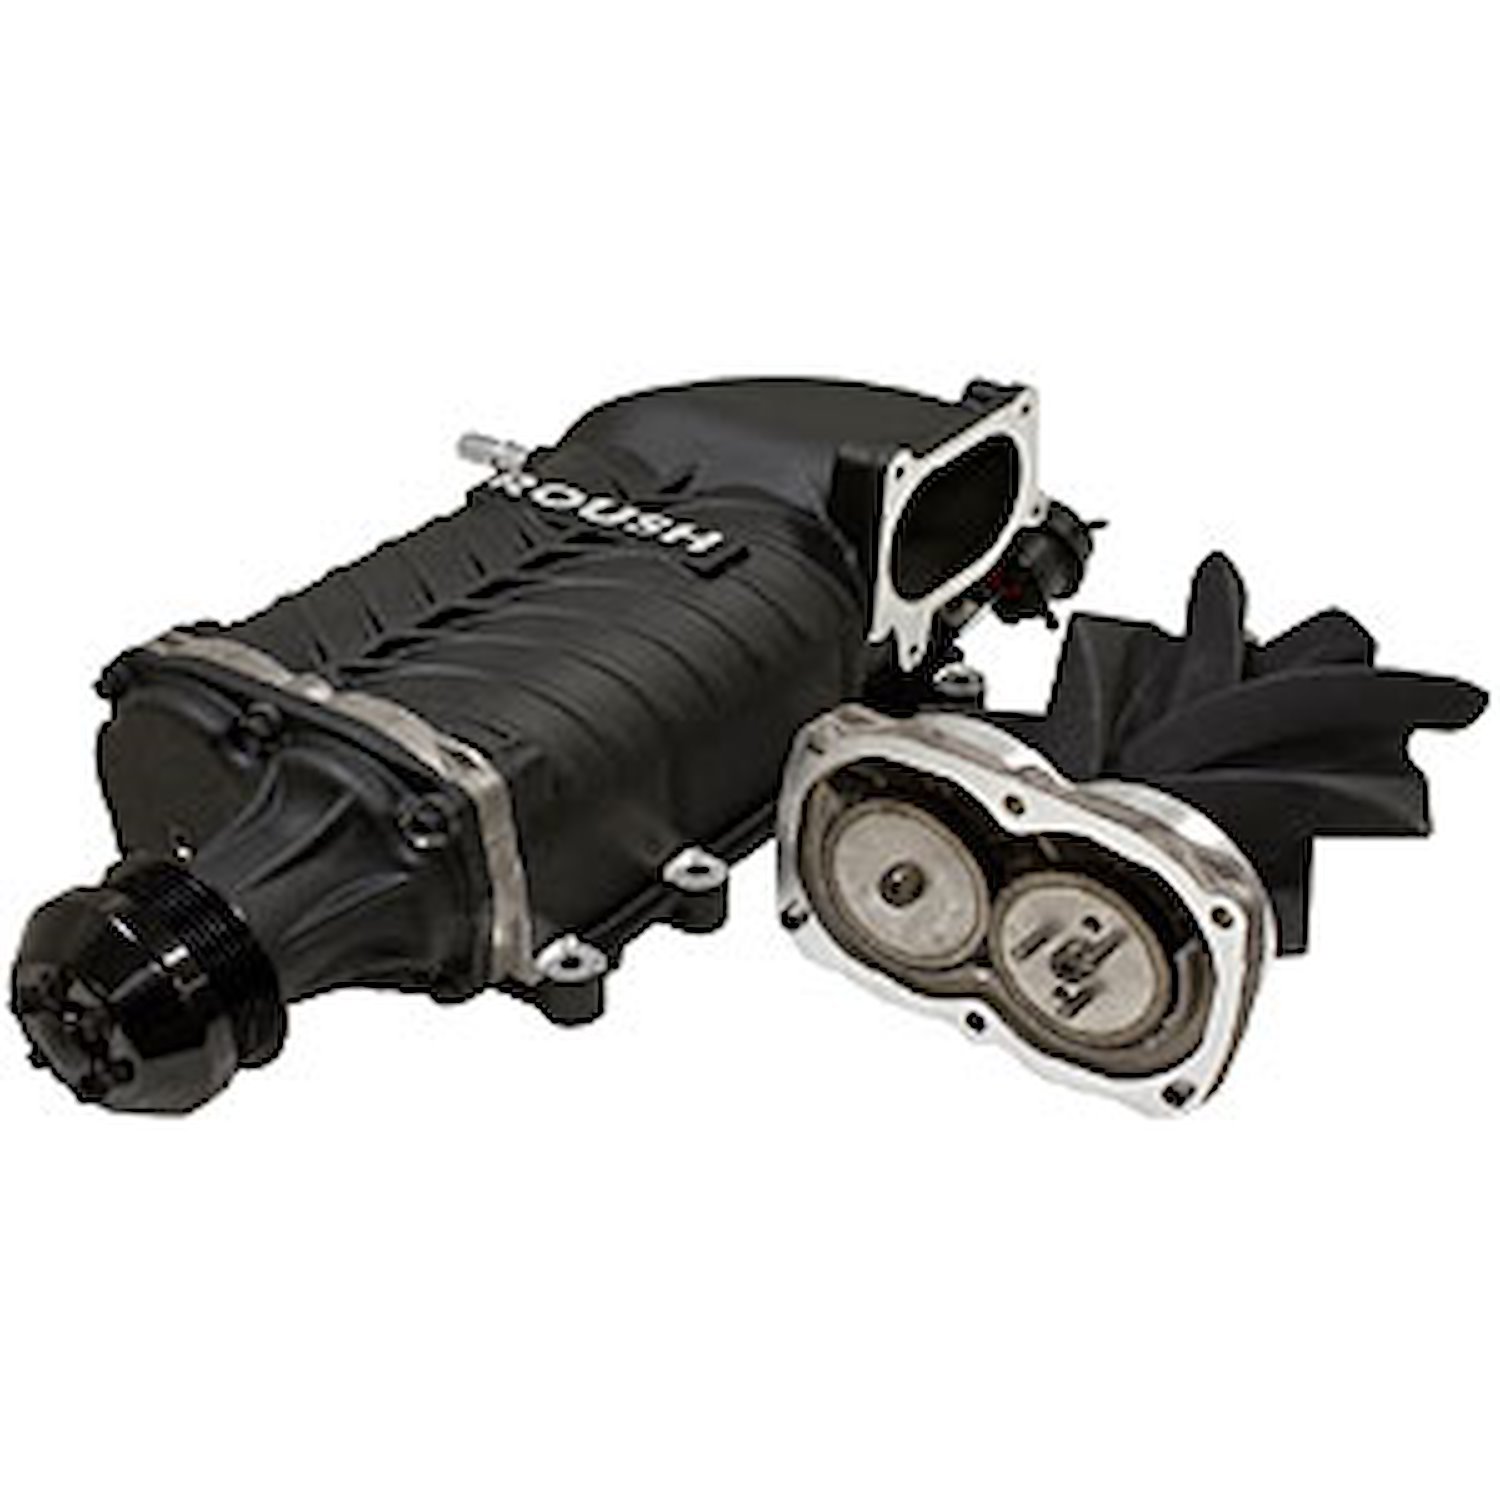 Supercharger Kit 2011-14 Mustang 5.0L 4V (except BOSS 302)